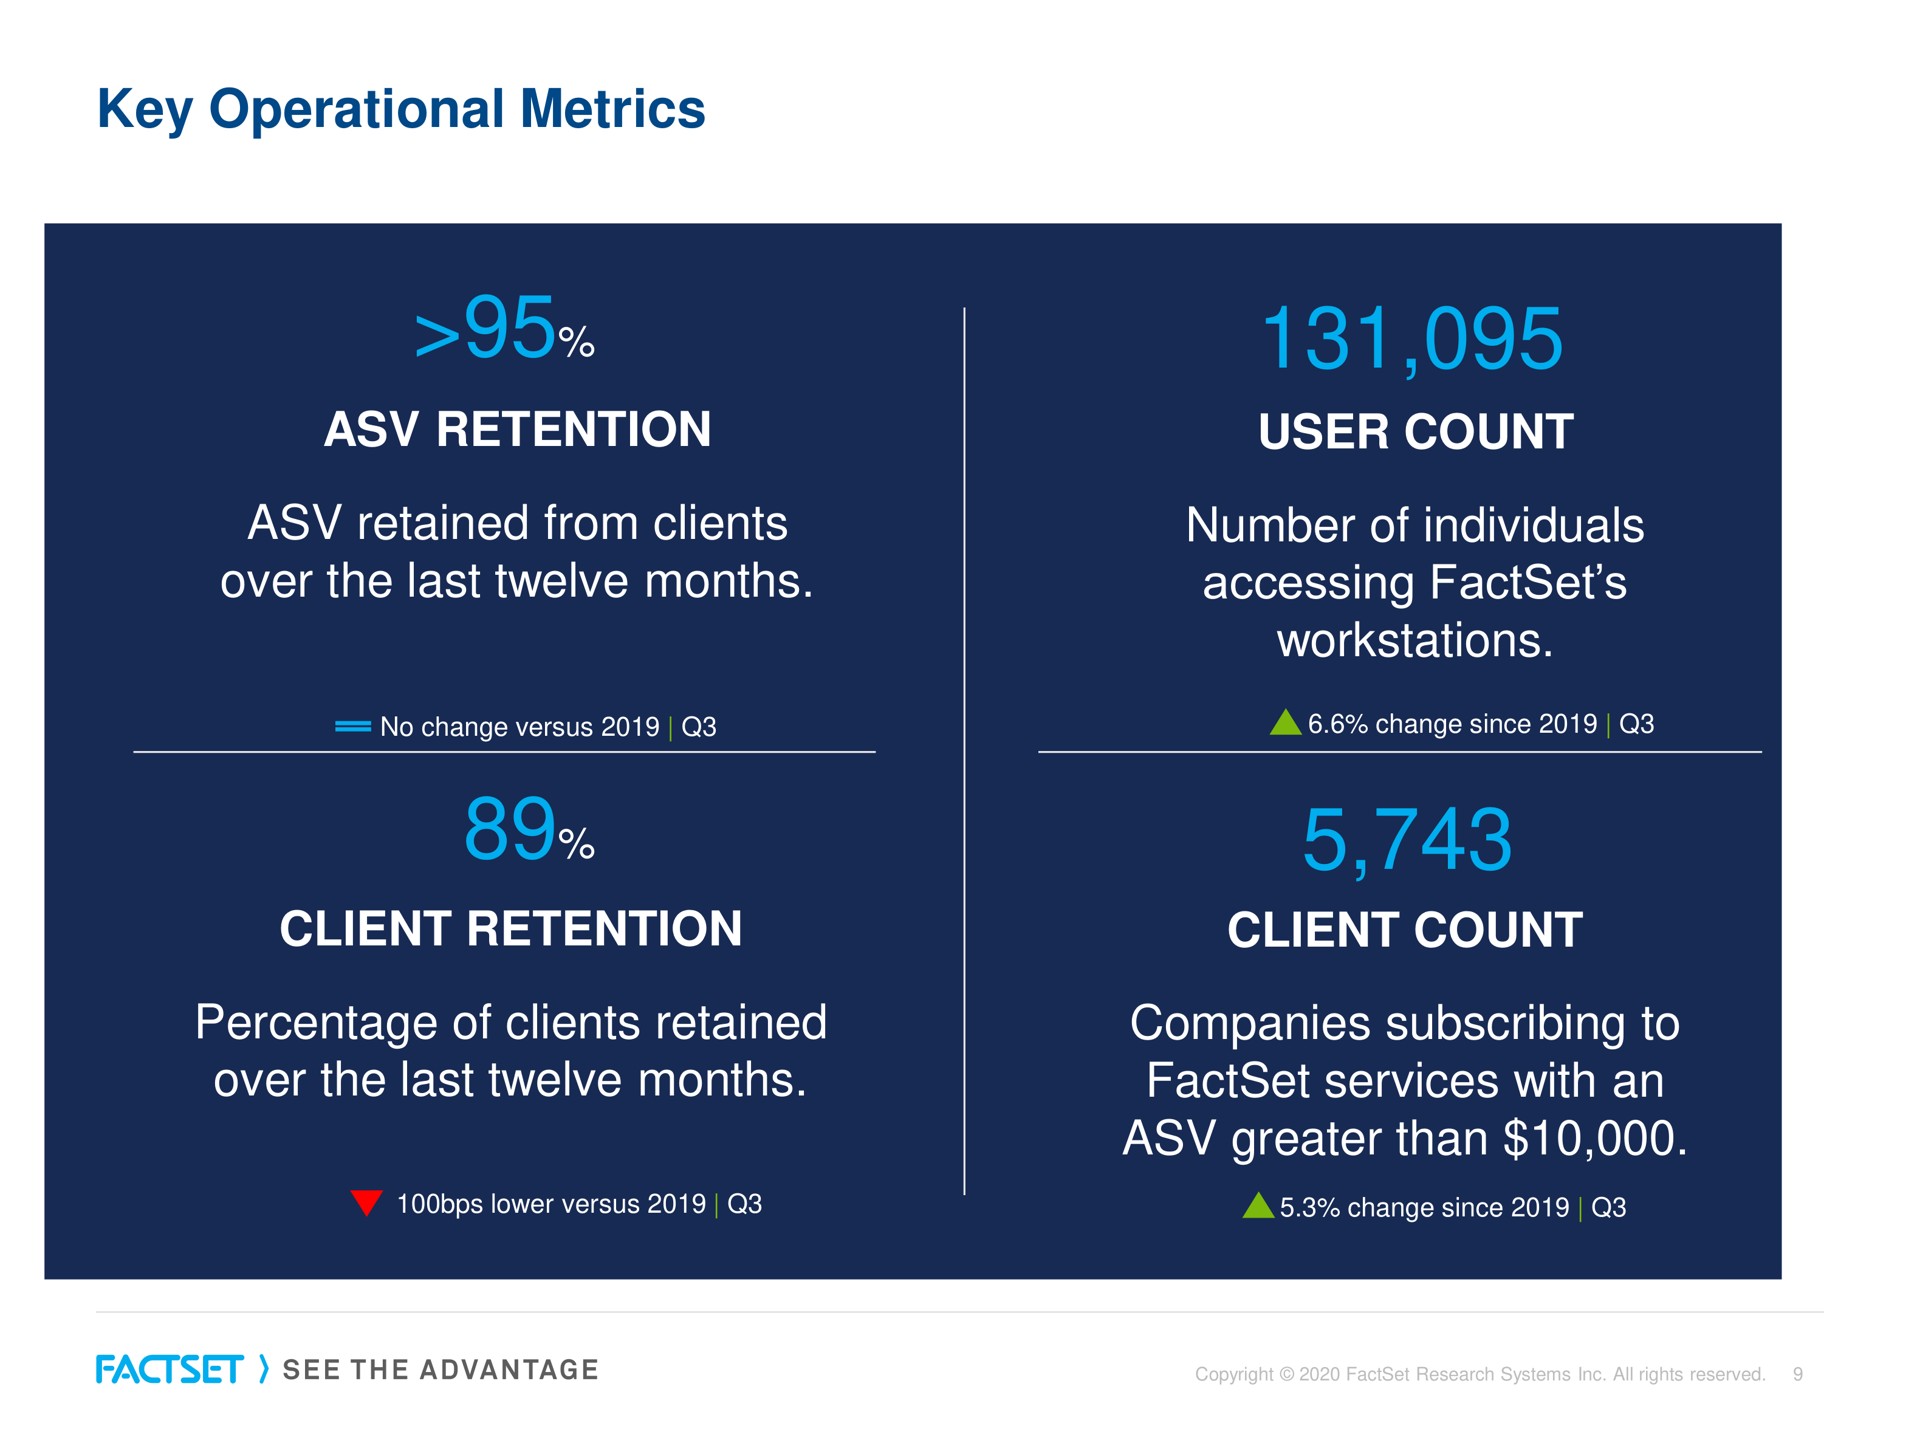 key operational metrics retention retained from clients over the last twelve months user count number of individuals accessing client retention percentage of clients retained over the last twelve months client count companies subscribing to services with an greater than | Factset